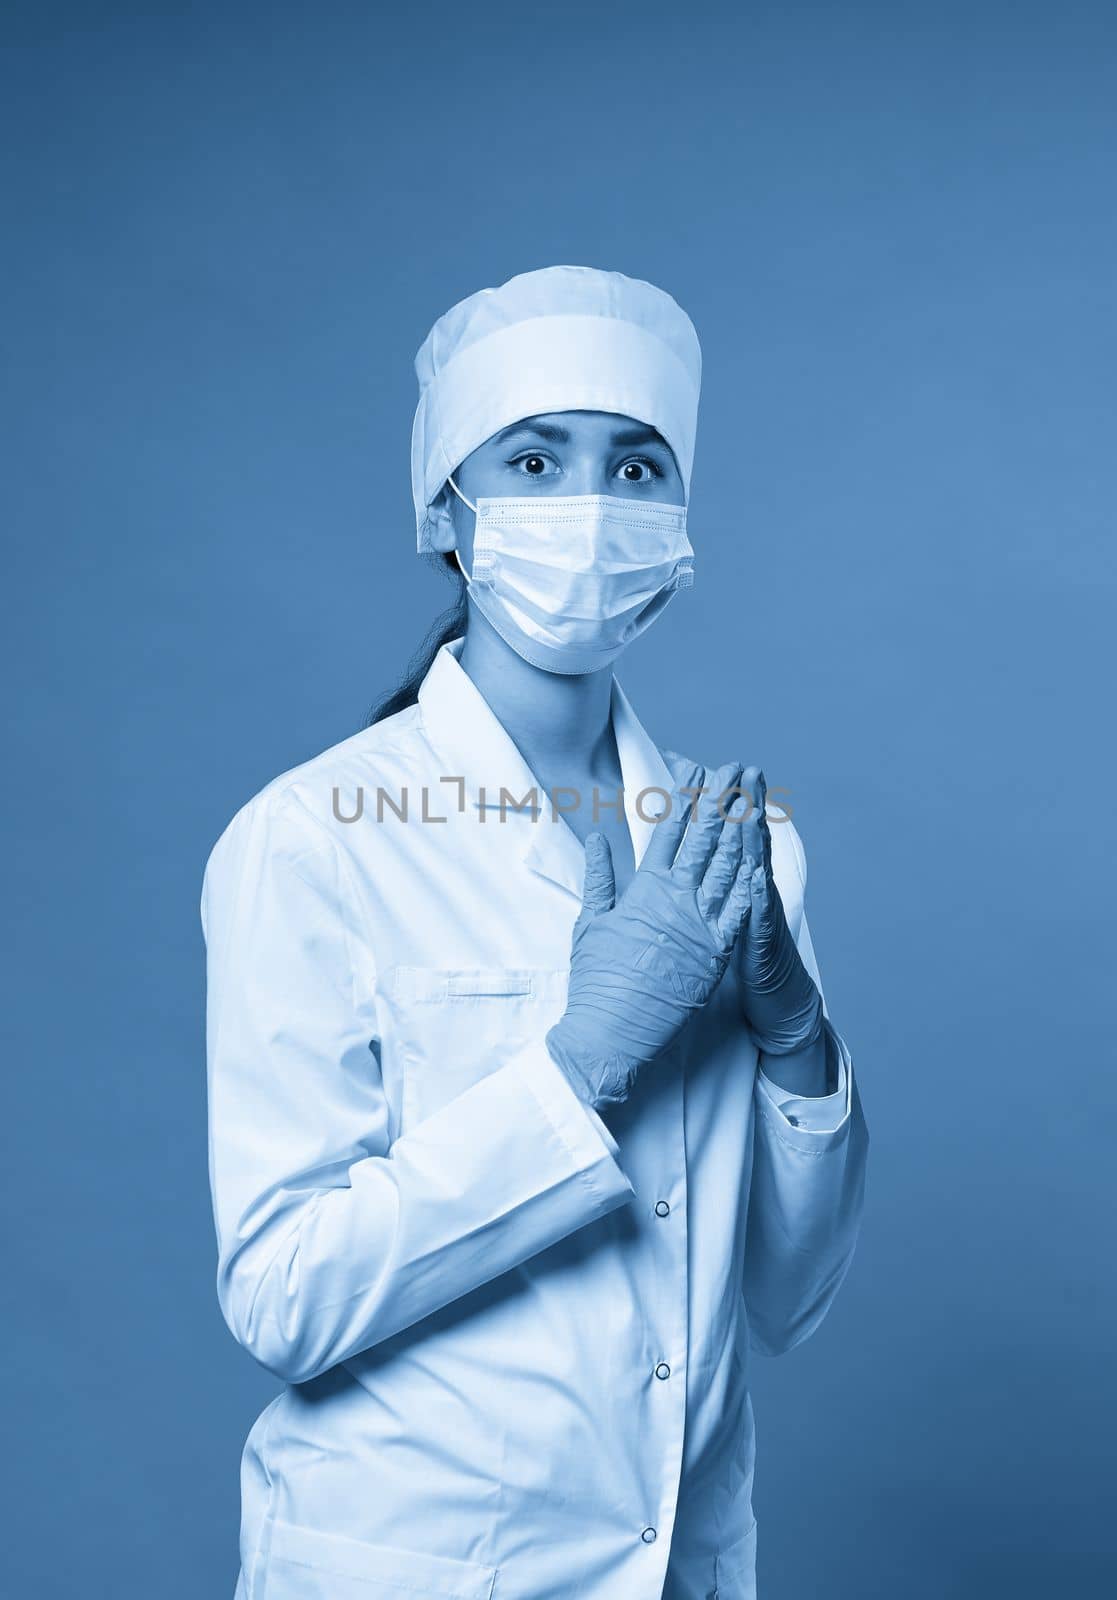 Young doctor with stethoscope against light background,